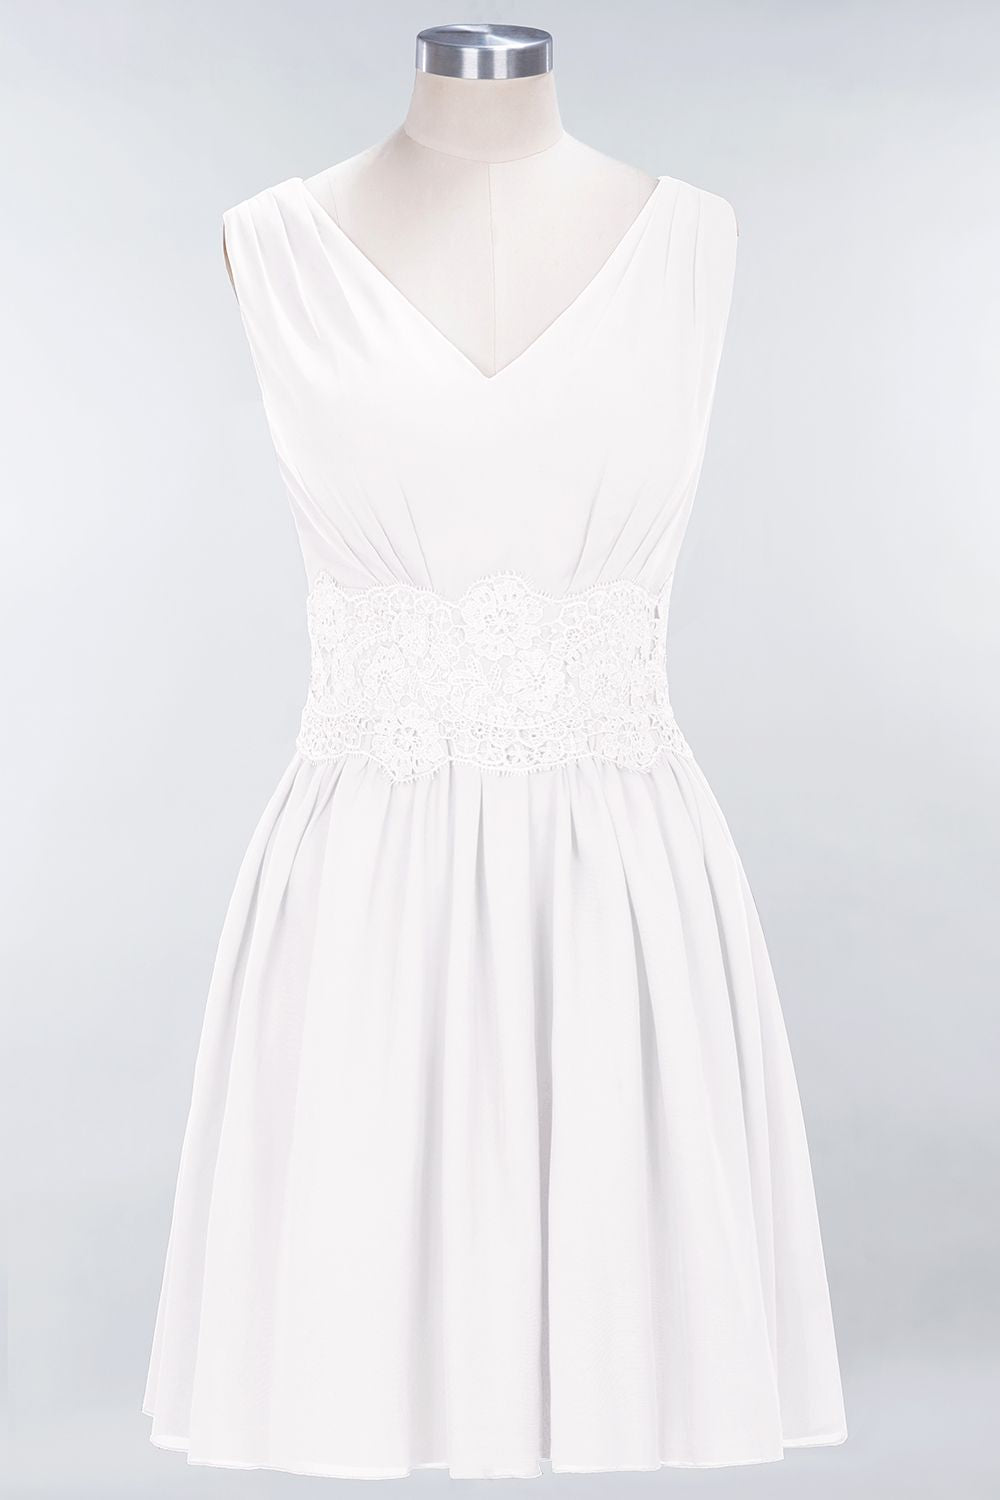 Load image into Gallery viewer, Pretty V-Neck Short Sleeveless Lace Bridesmaid Dresses Online-27dress
